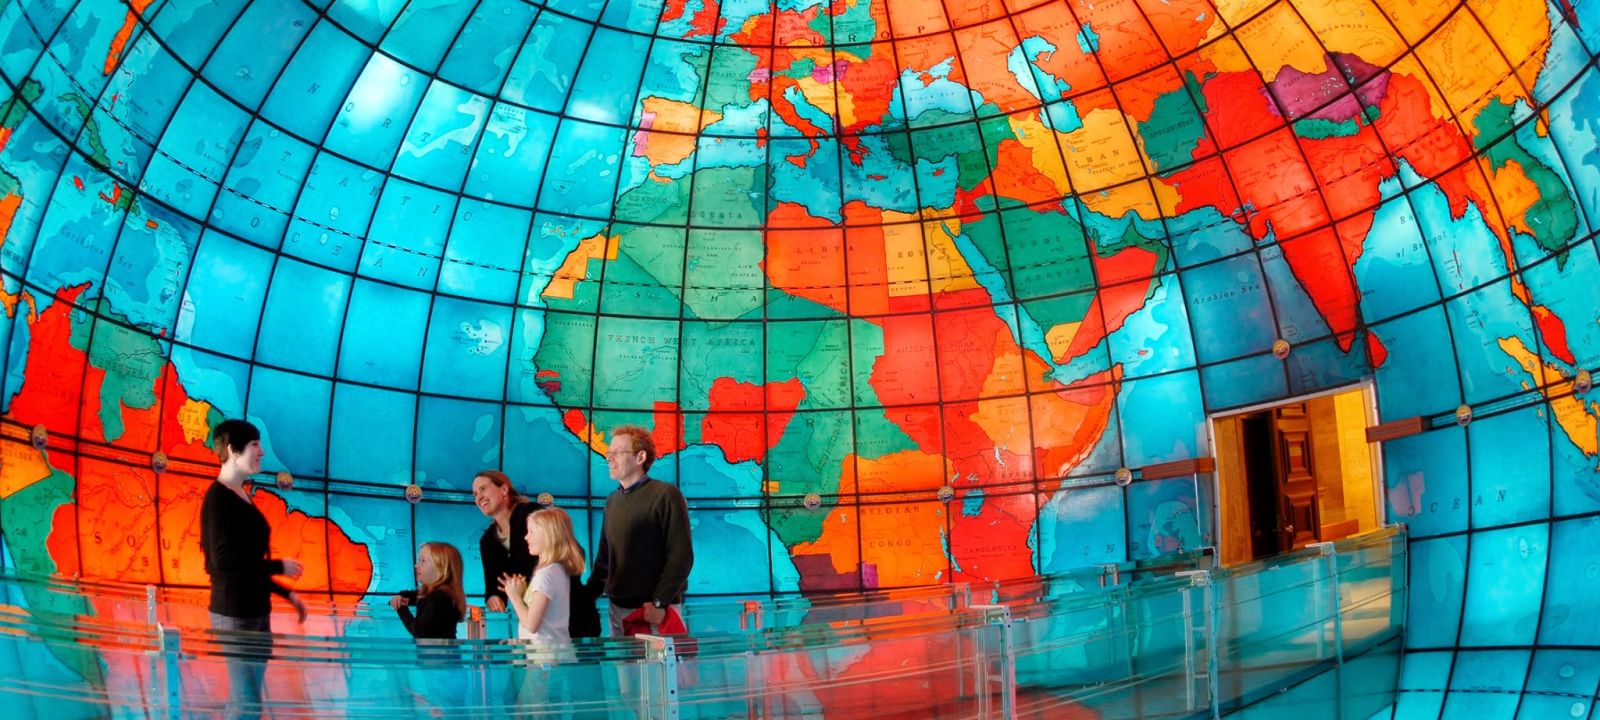 A Colorful Umbrella With Mapparium In The Background